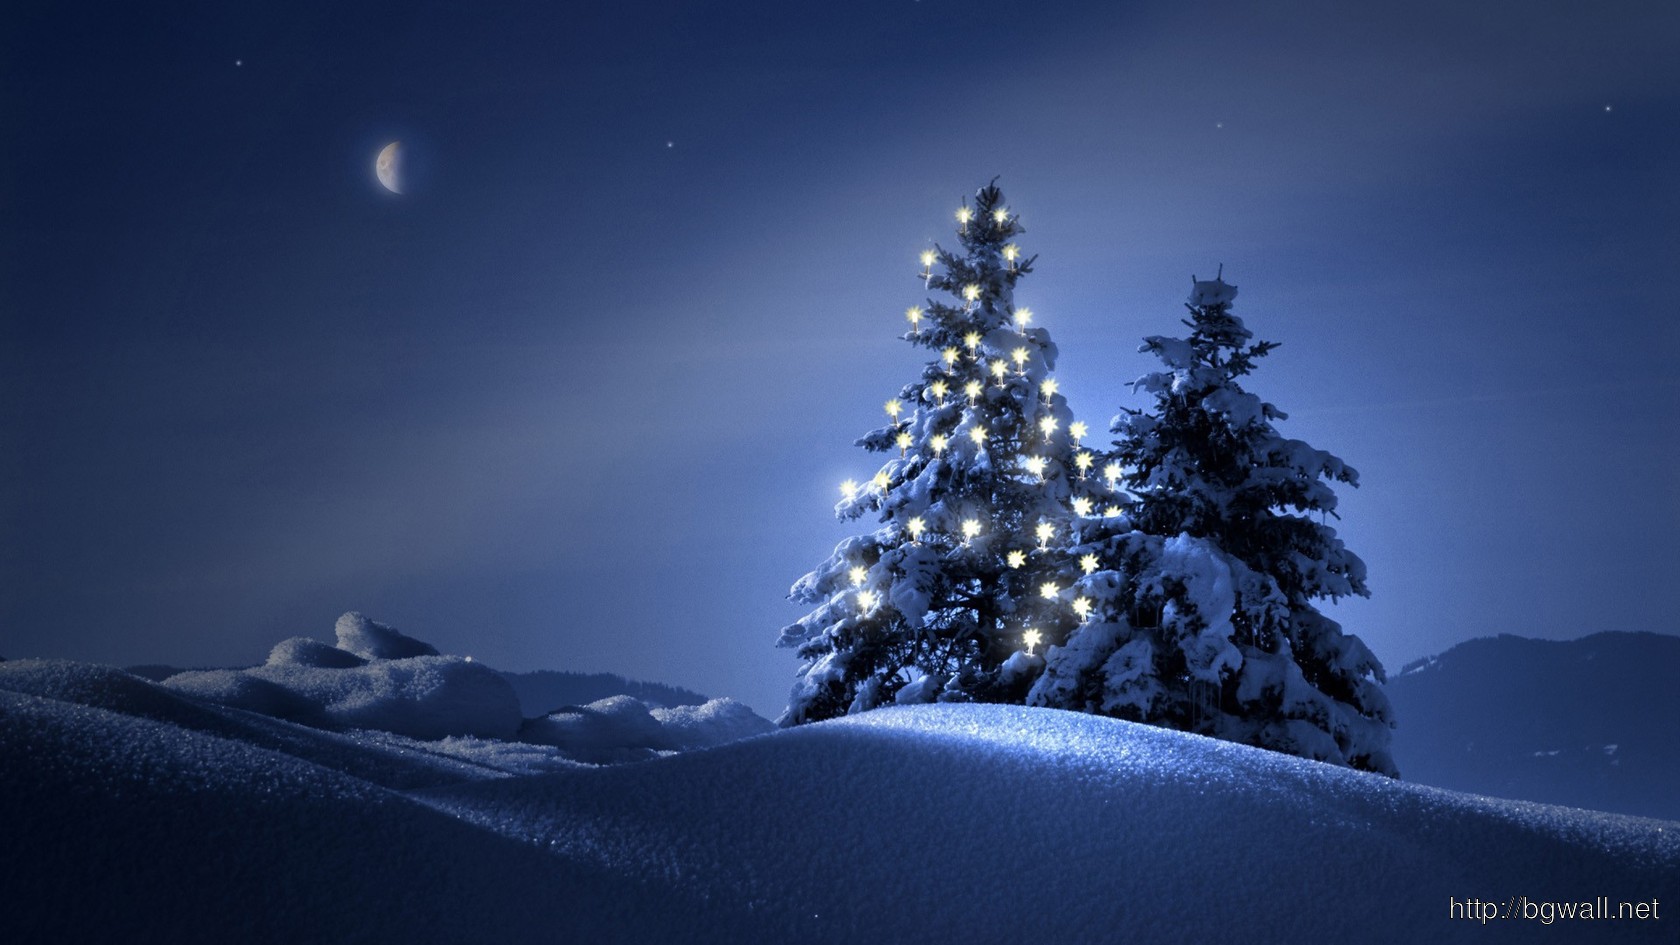 Download Wallpaper - Night With Christmas Tree , HD Wallpaper & Backgrounds